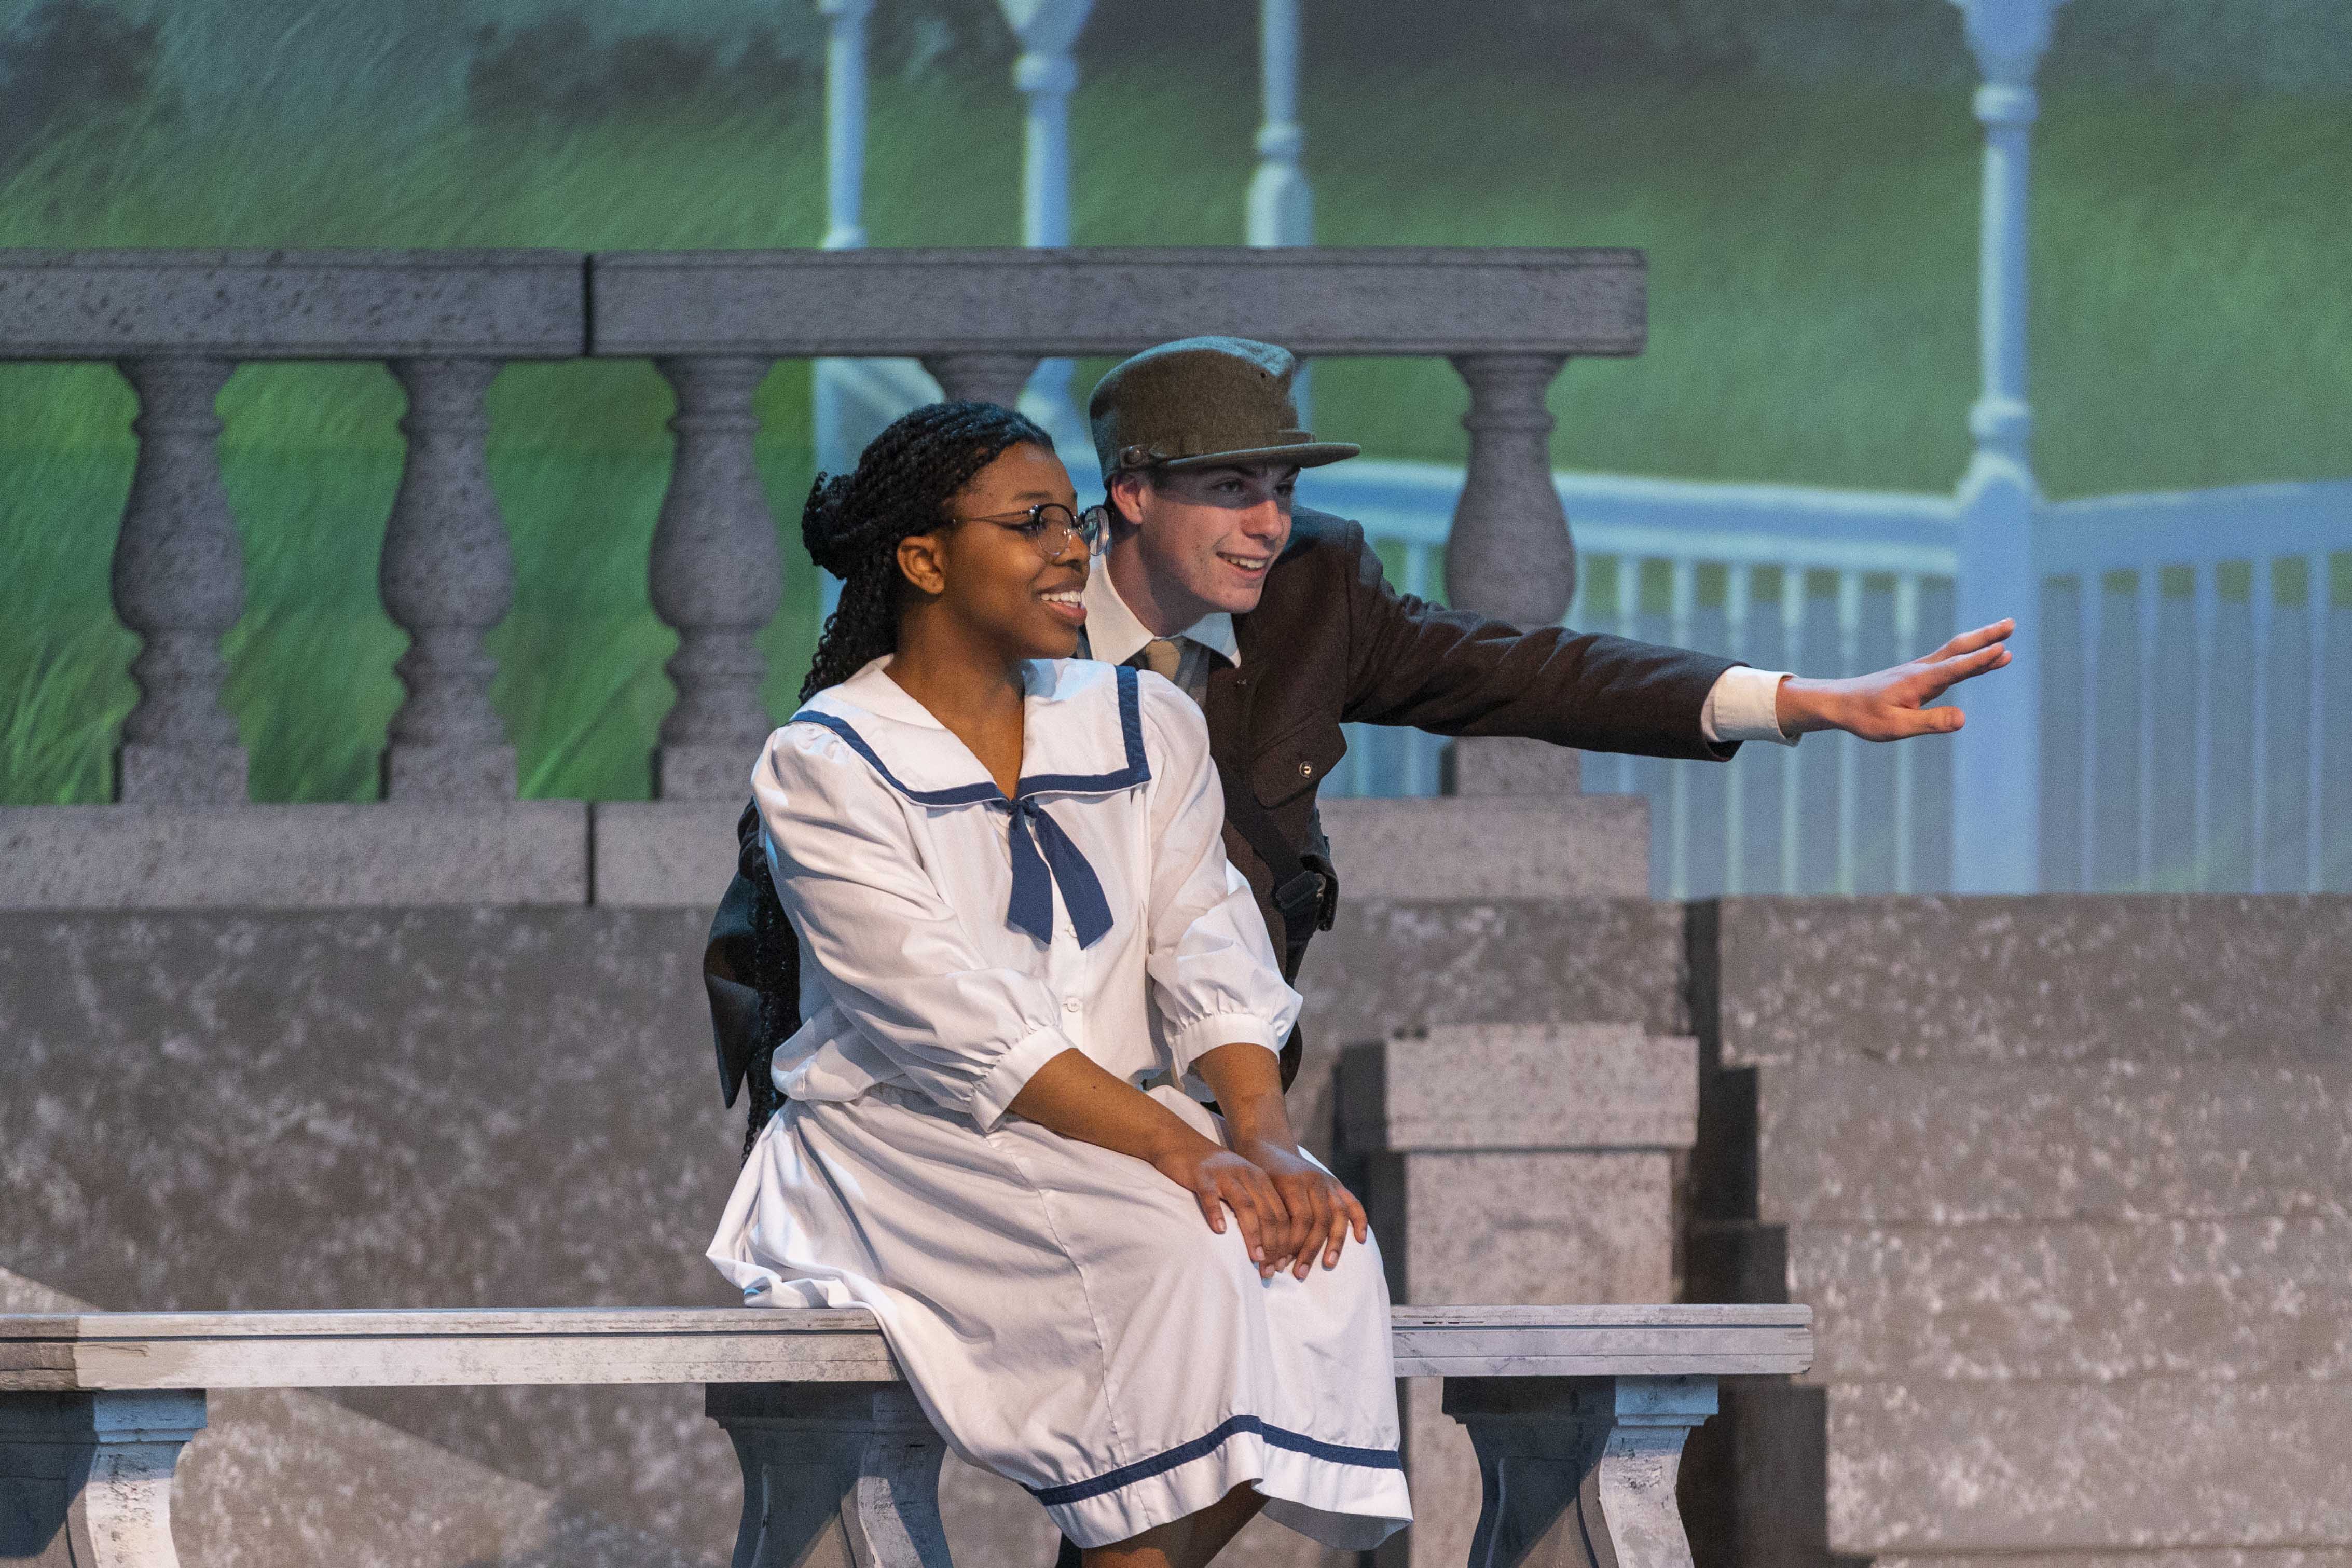 Knox Production of The Sound of Music